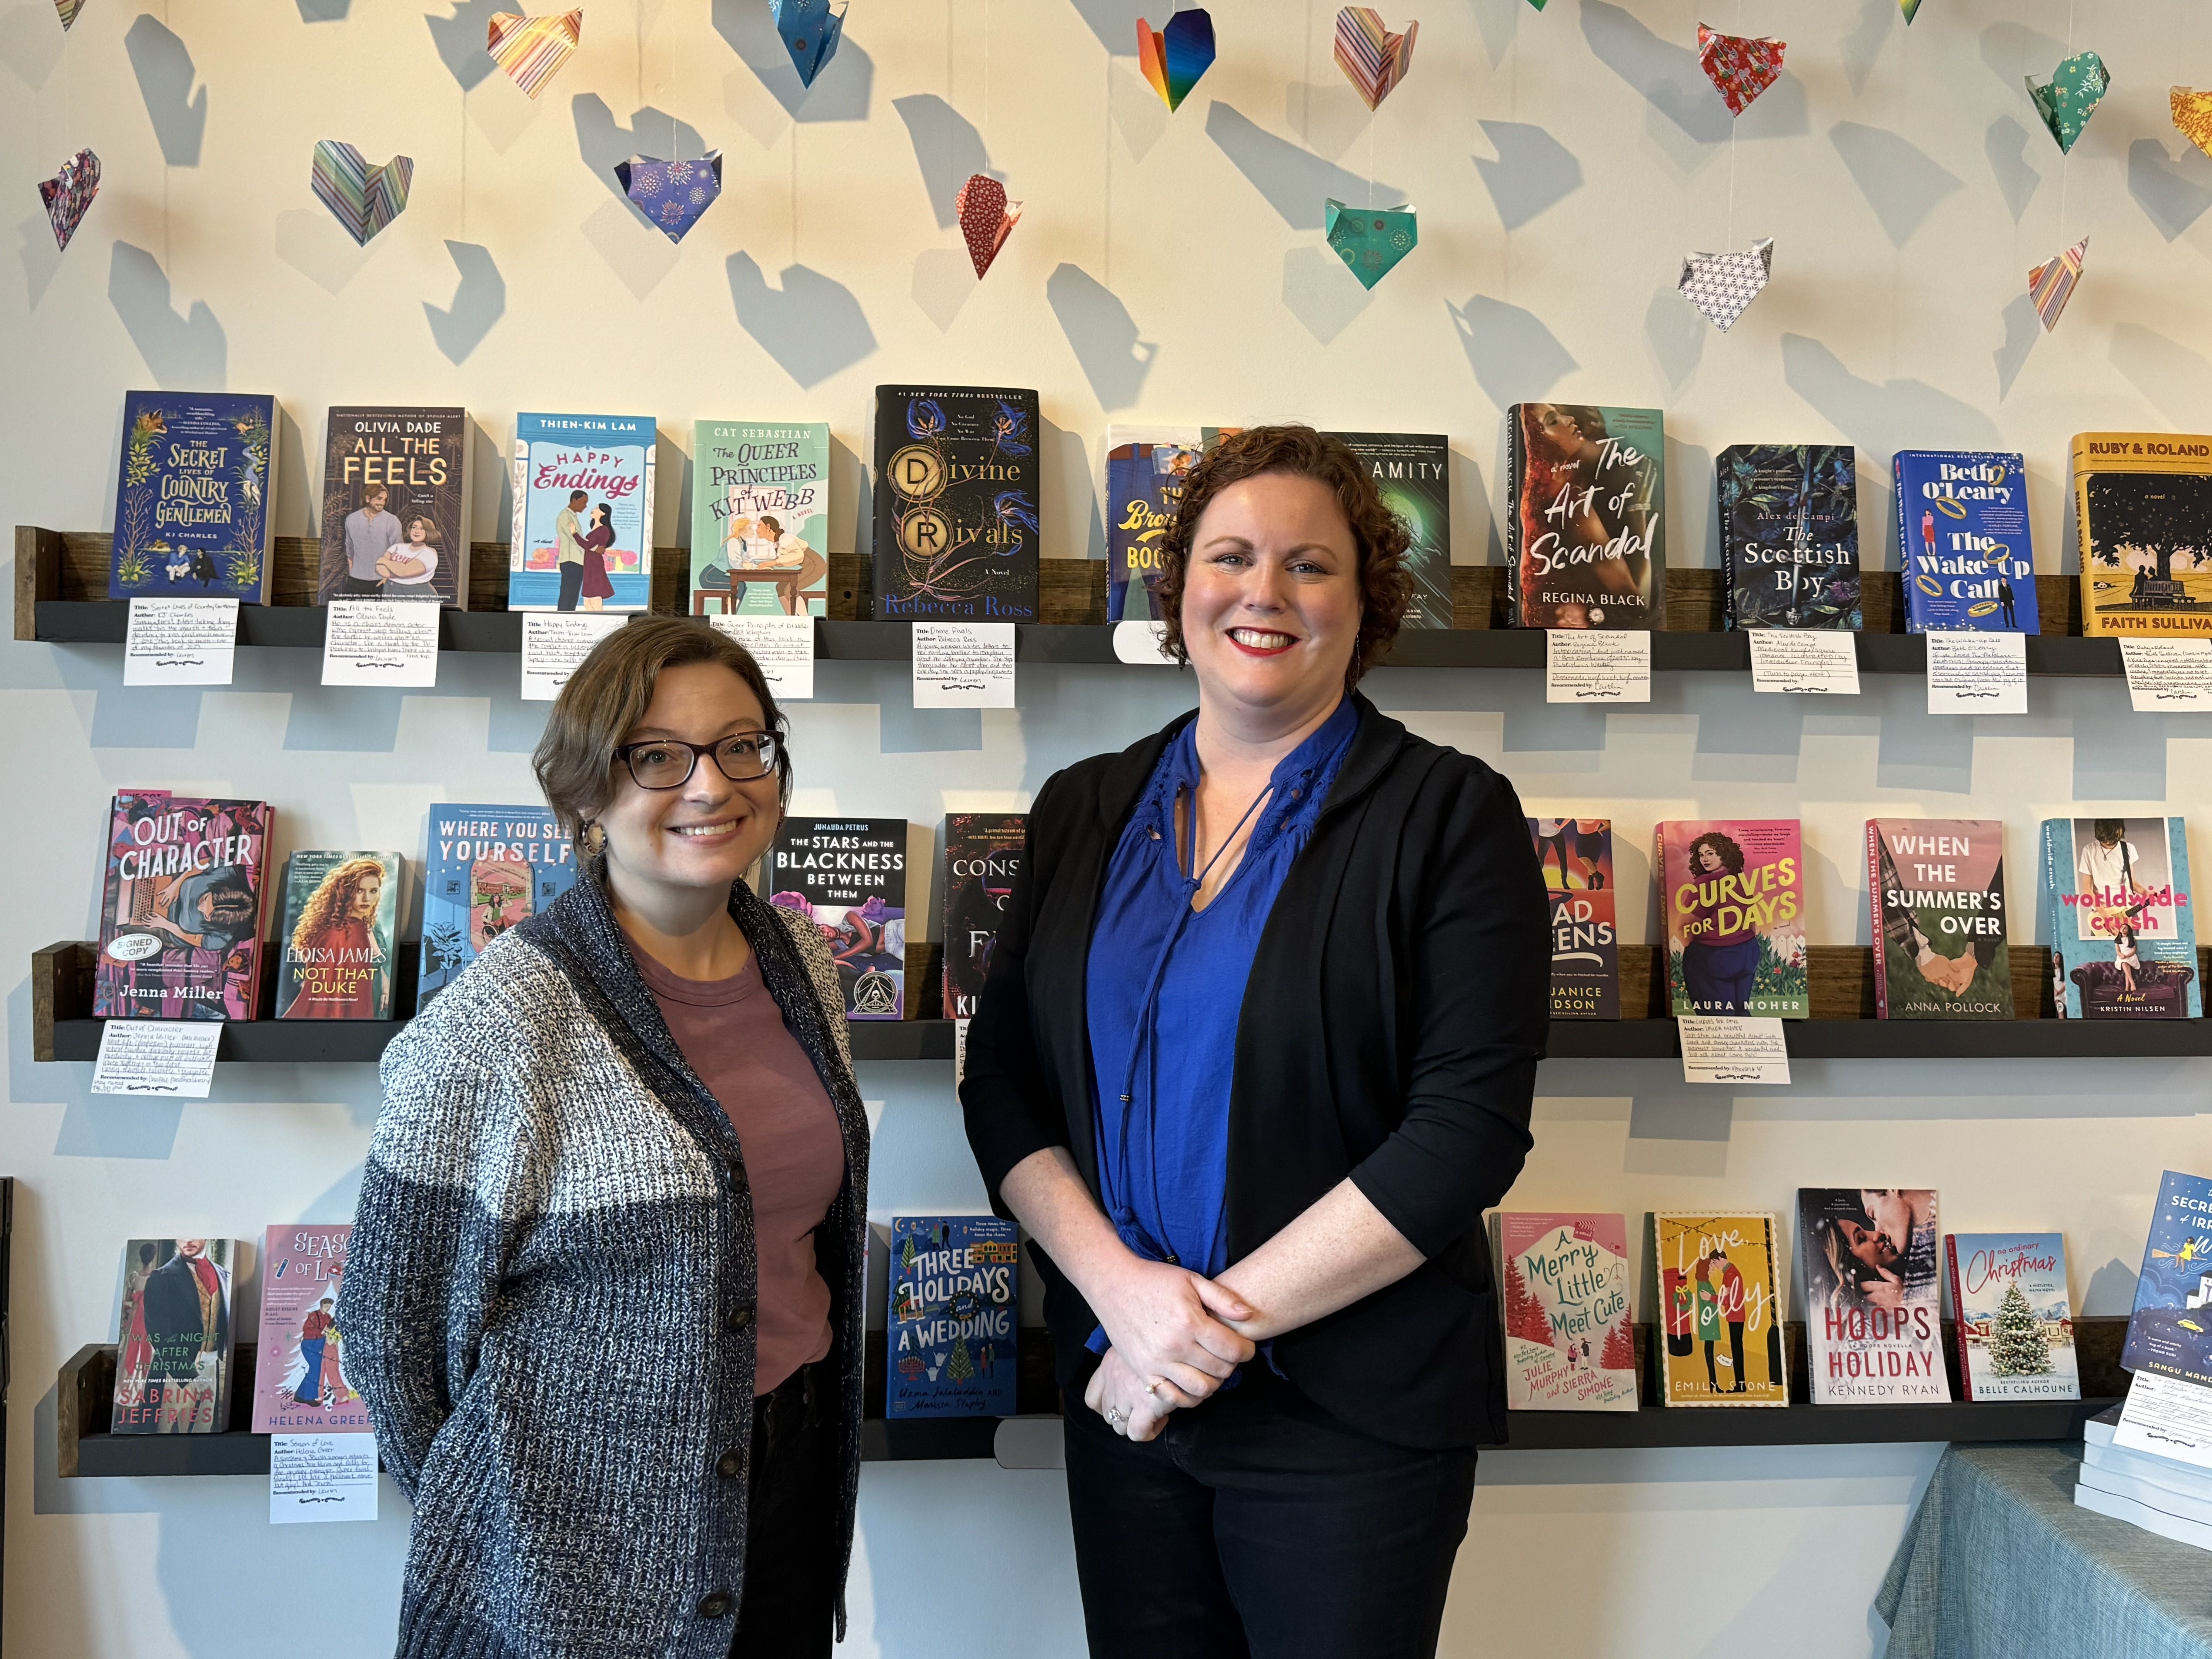 A woamn in a purple top and grey cardigan in glasses stands next to a taller woman with a blue shirt and black sweater in front of a row of books